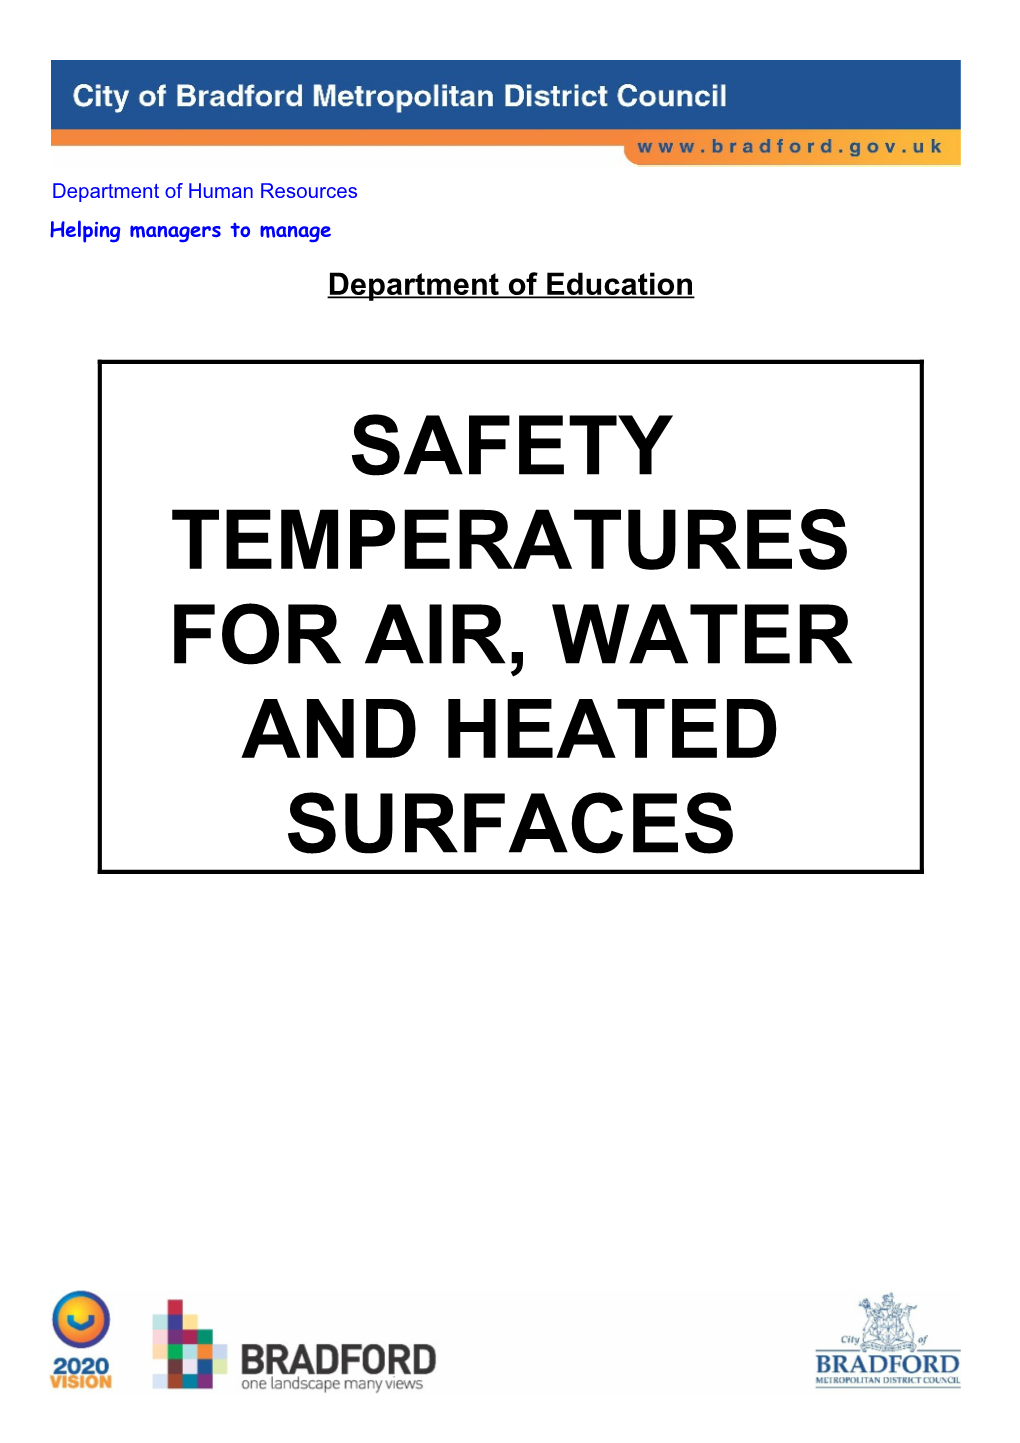 Hot Water, Surface and Air Temperatures